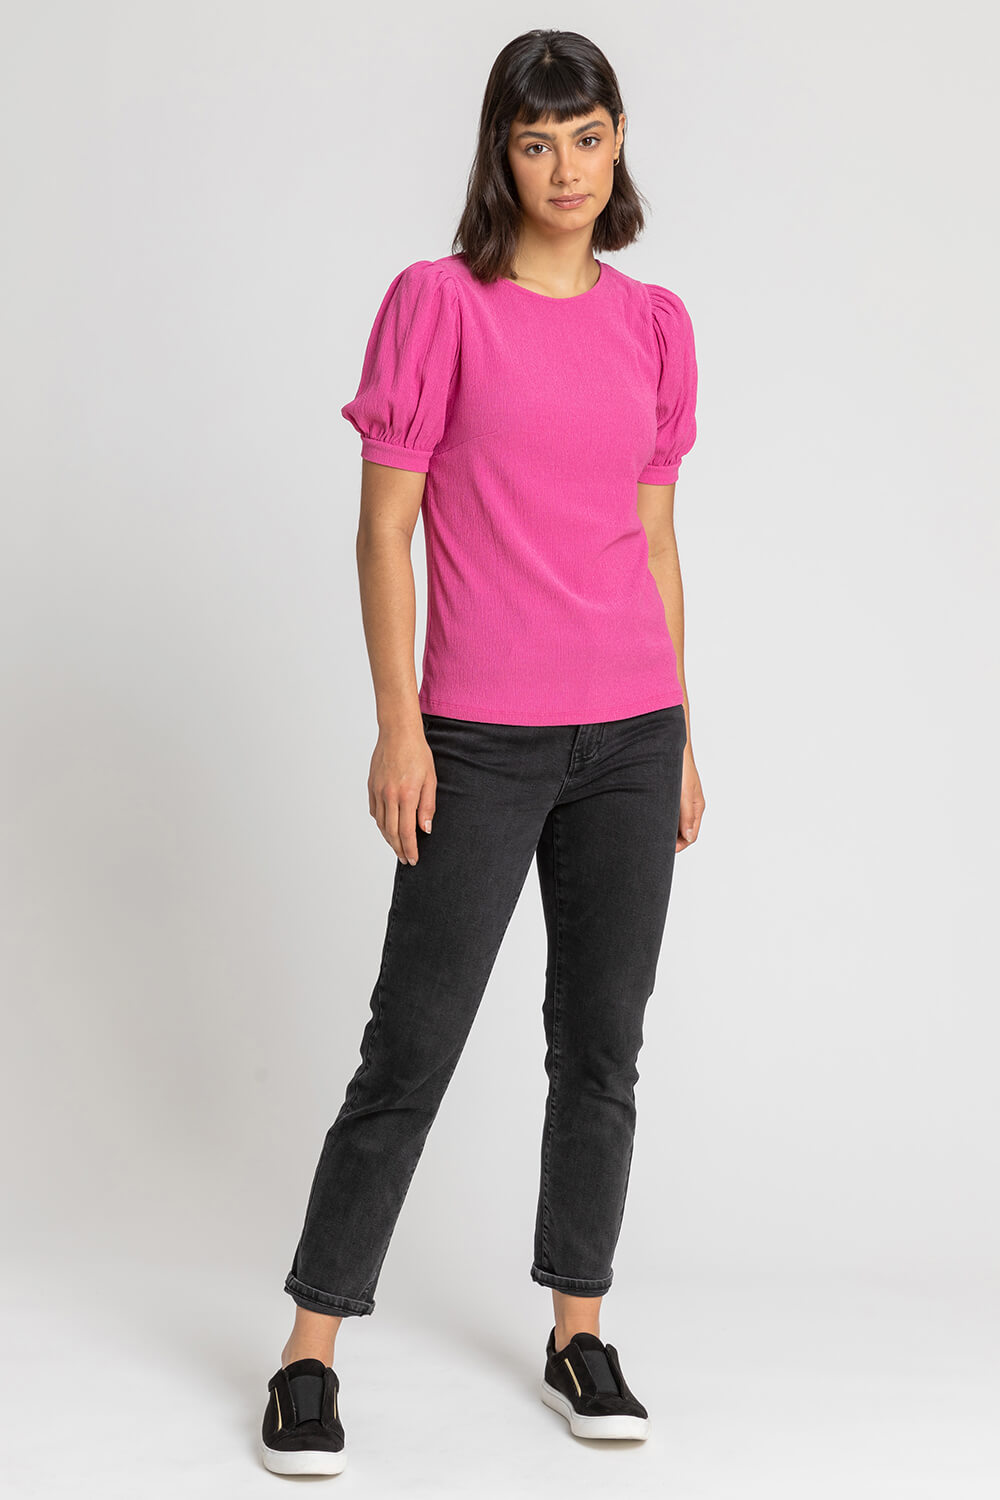 PINK Textured Puff Sleeve Jersey Top, Image 3 of 4